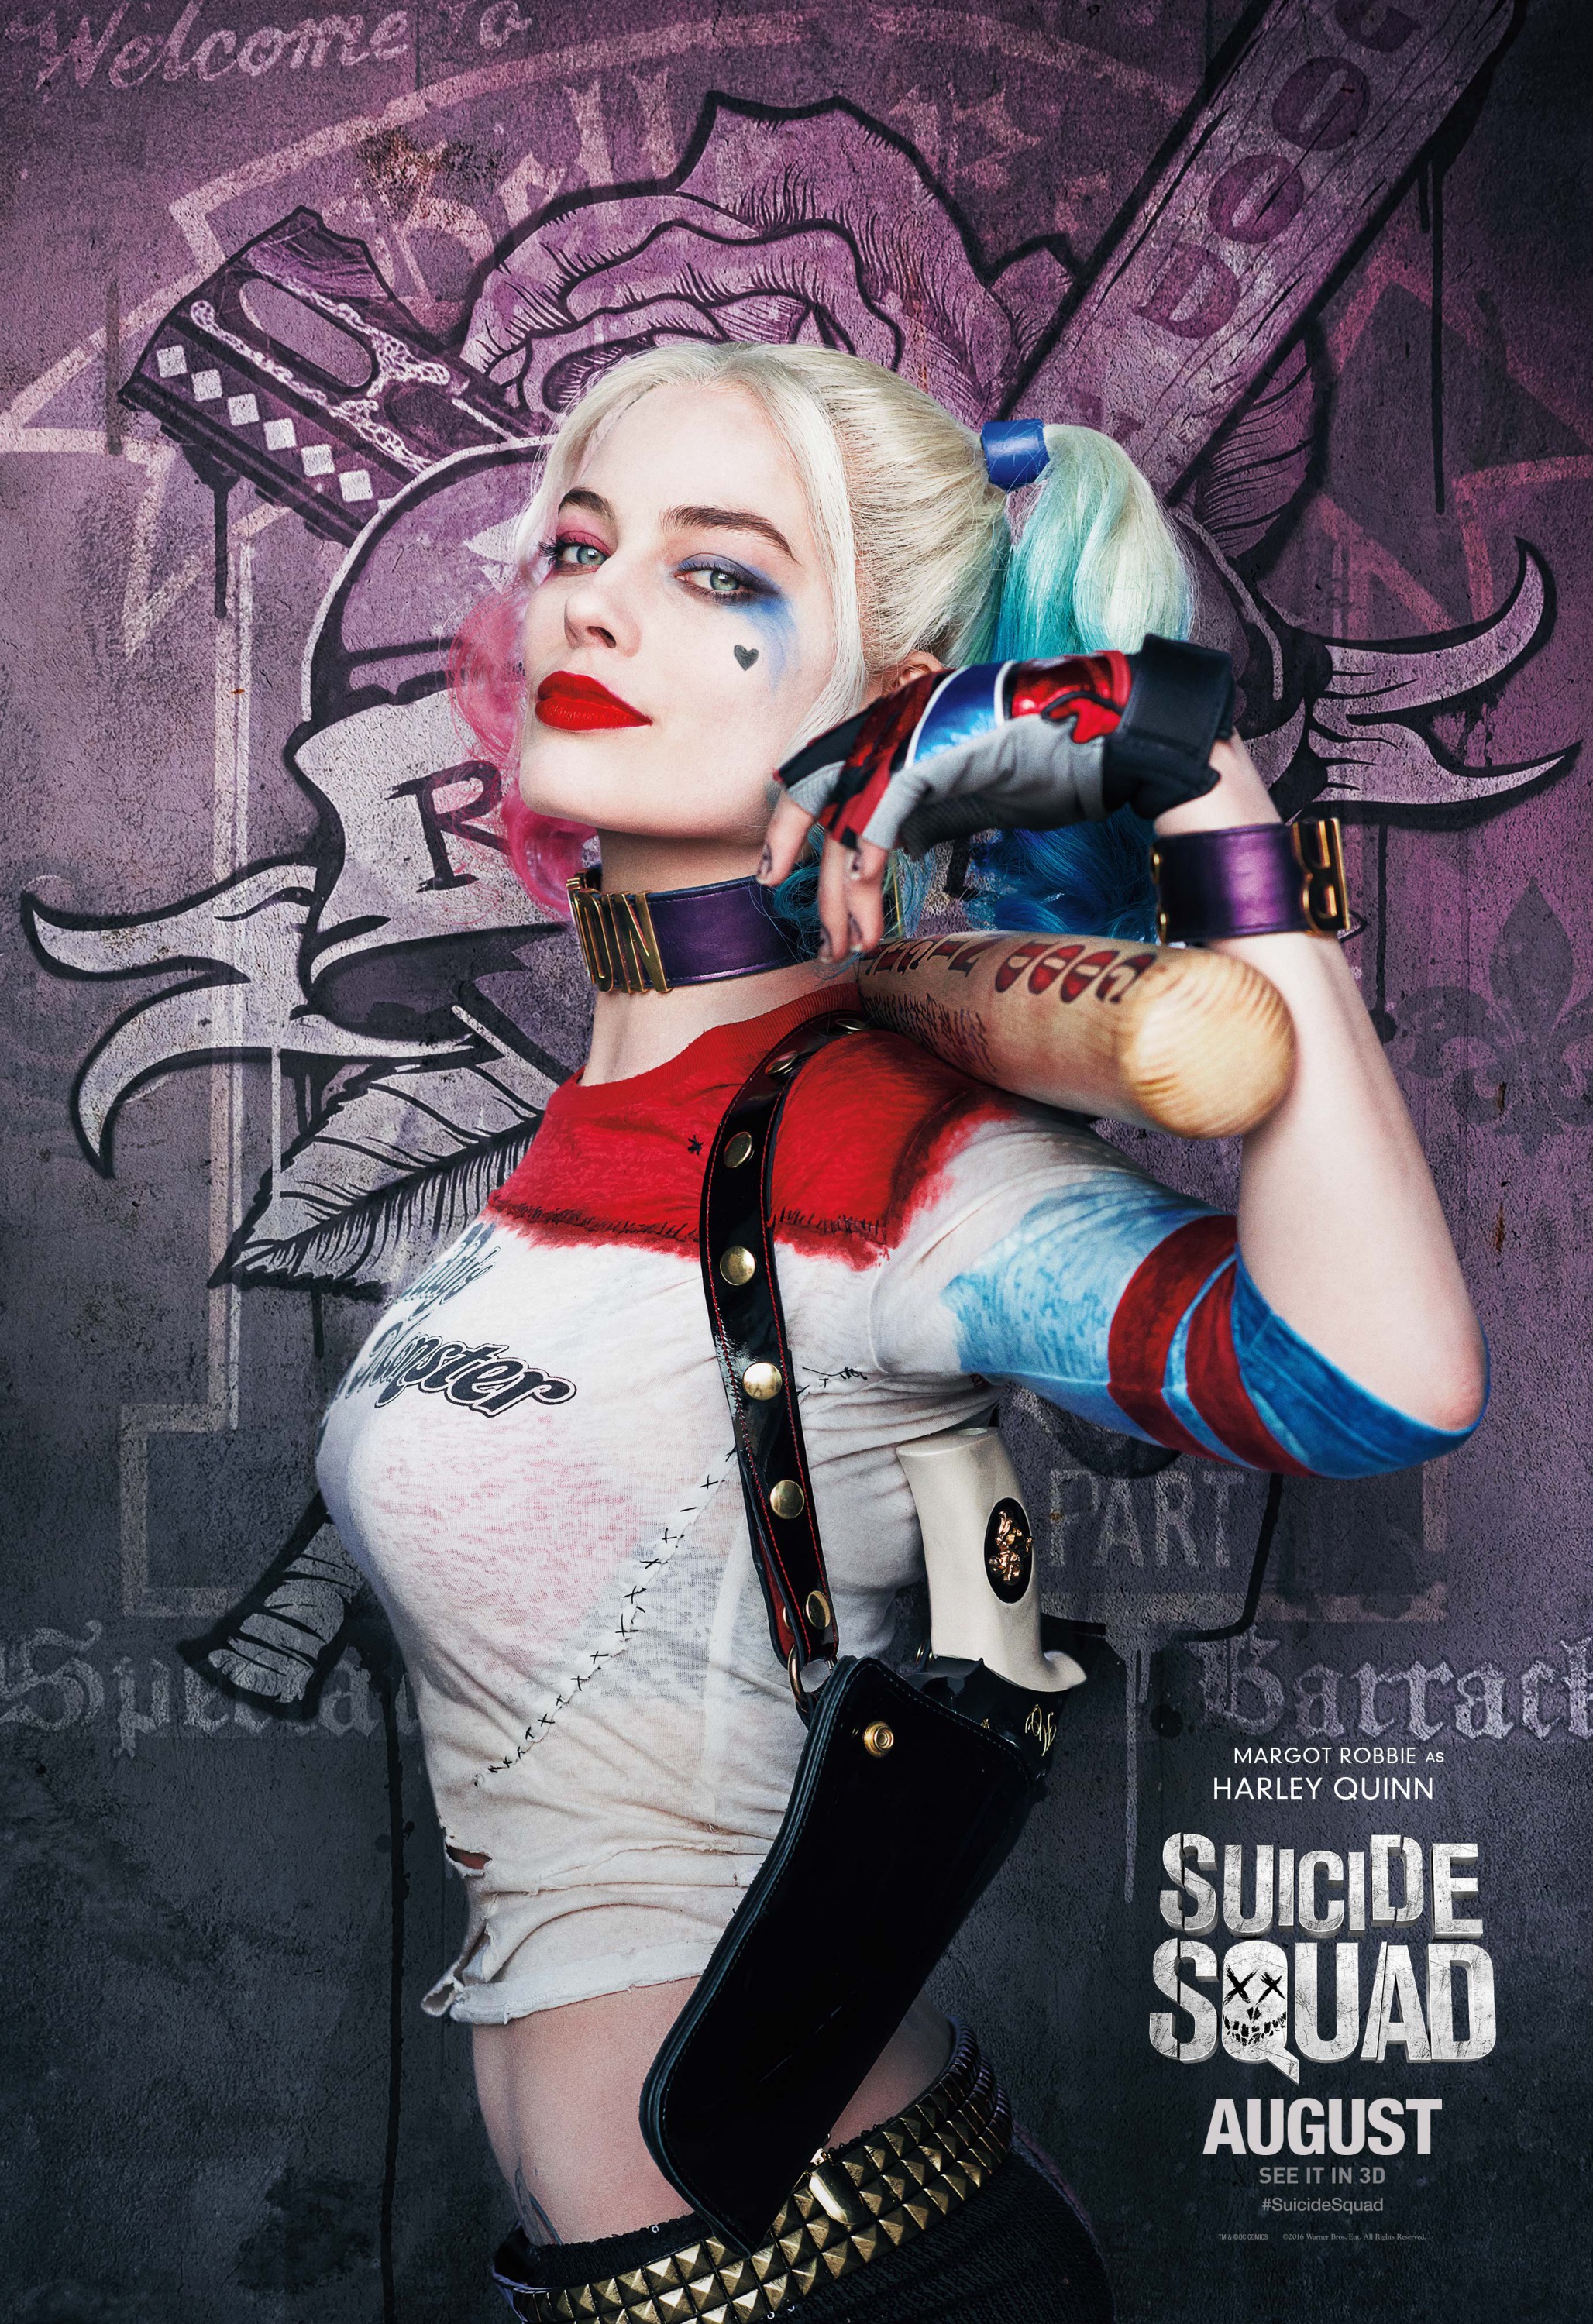 Suicide Squad Poster Margot Robbie as Harley Quinn